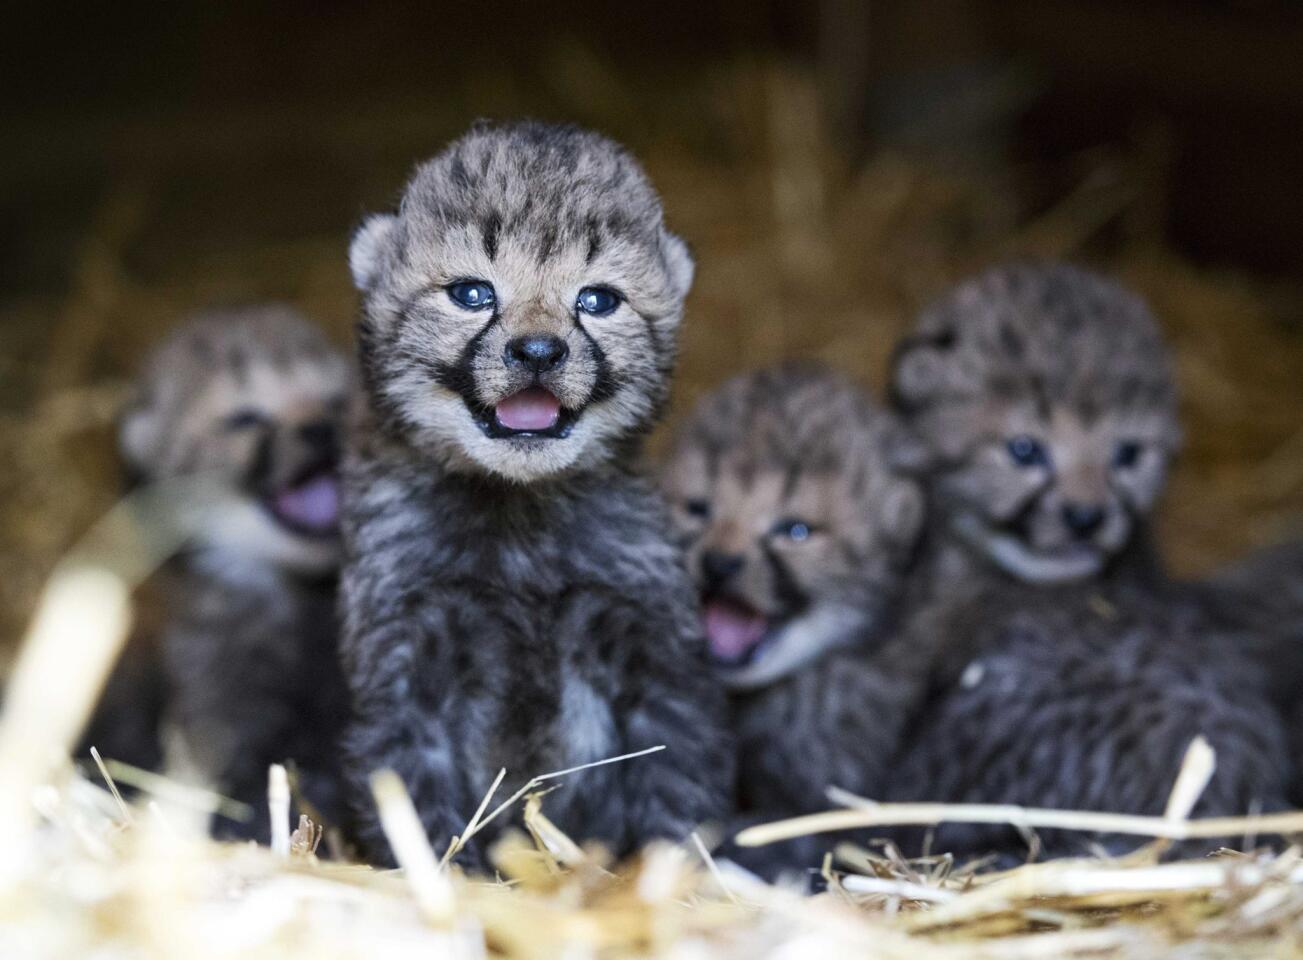 Six cheetah cubs stand in their enclosure at the Burgers Zoo in Arnhem, The Netherlands, on Sept. 30, 2016.